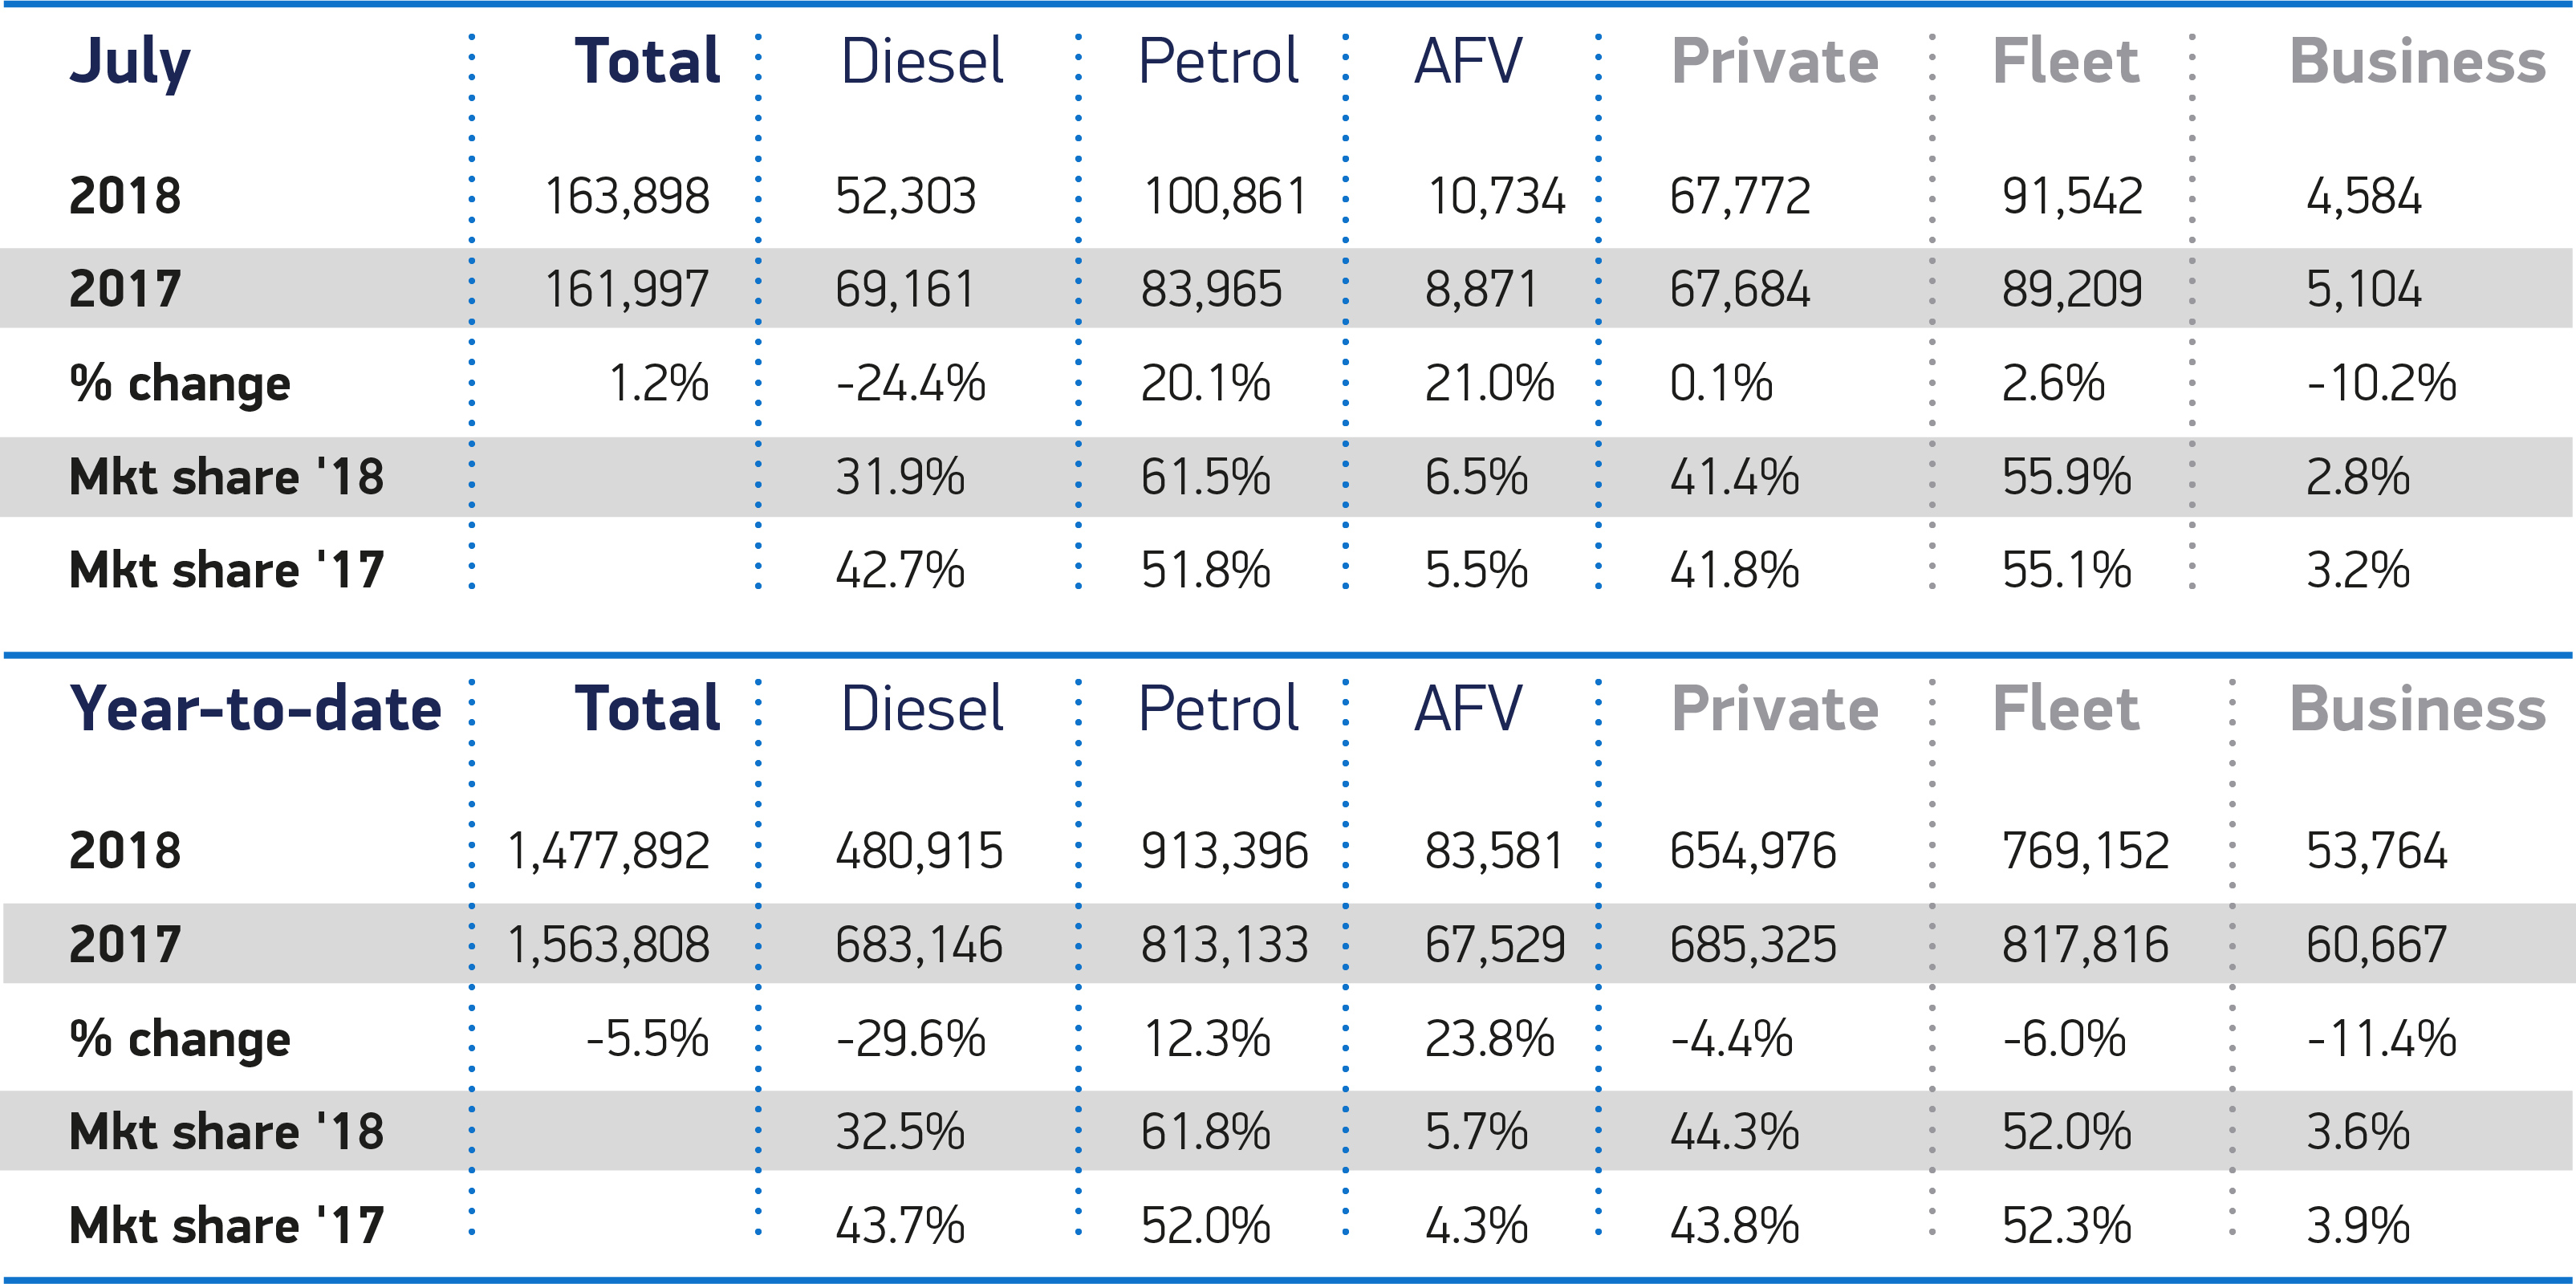 Diesel demand continues to drop as new UK car sales stabilise